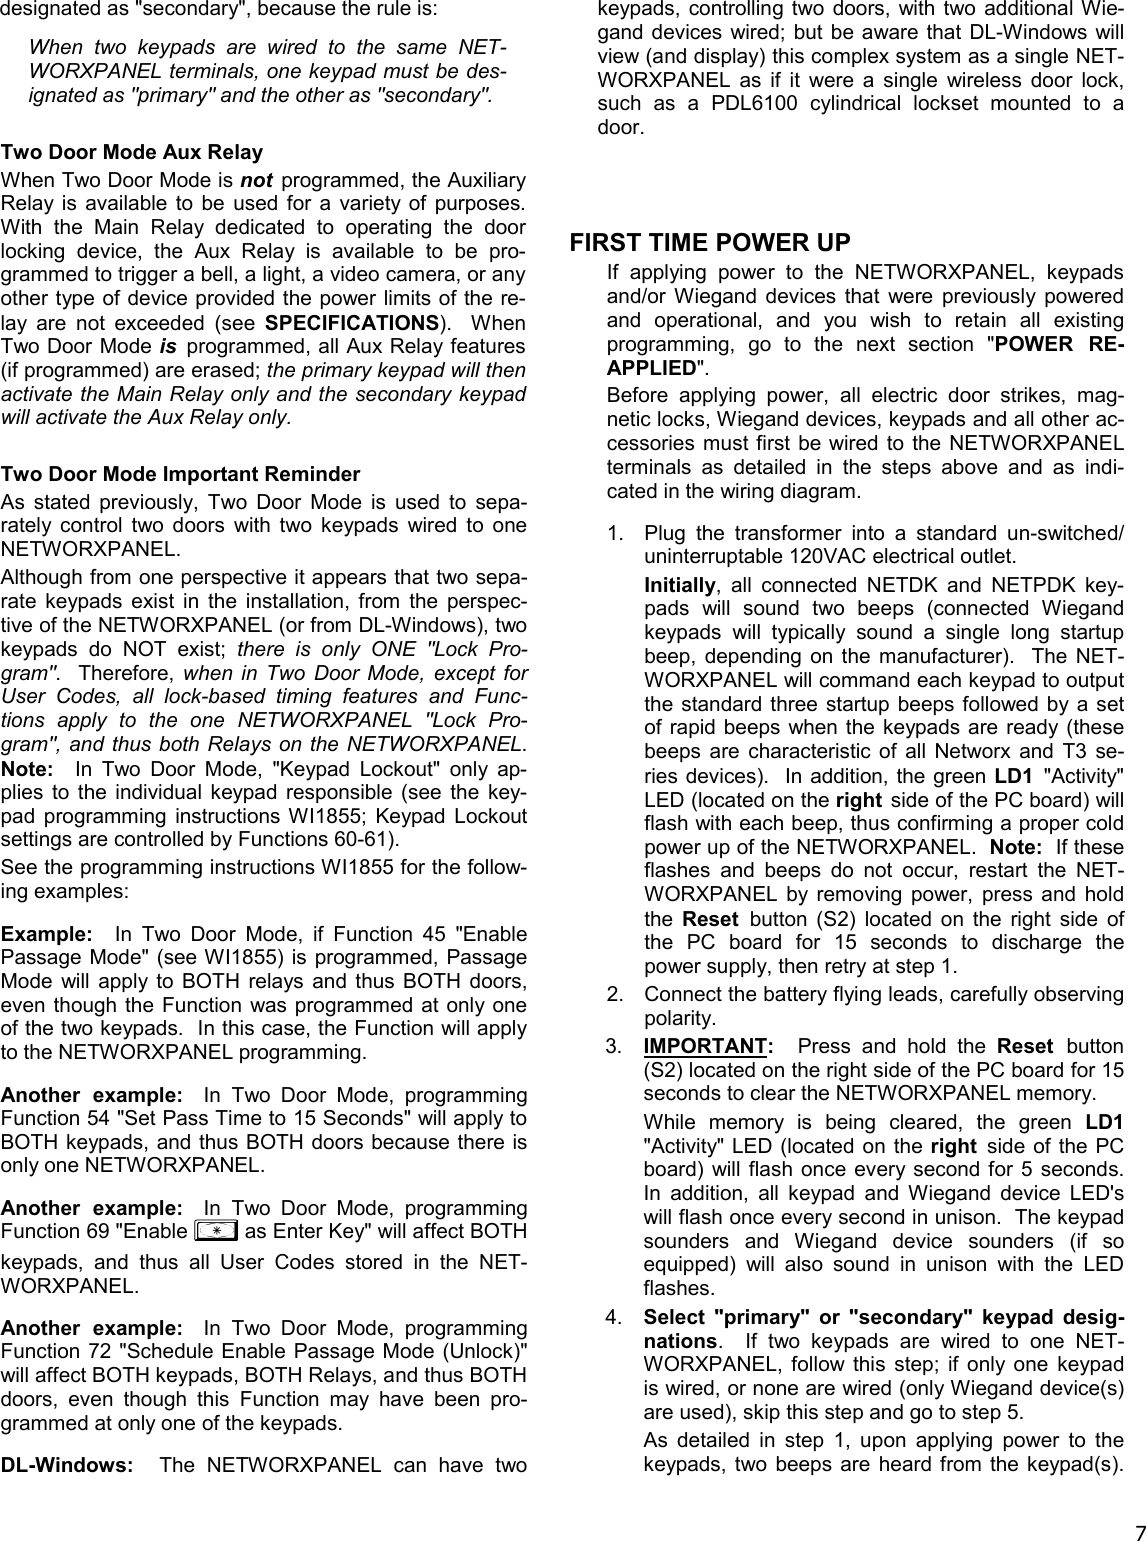 Page 7 of 12 - Alarm Lock NETWORXPANEL_WI1856B.02_INST NETWORXPANEL Wireless Networx Control Panel (NETDK/NETPDK) Installation Instructions WI1856B.02 INST